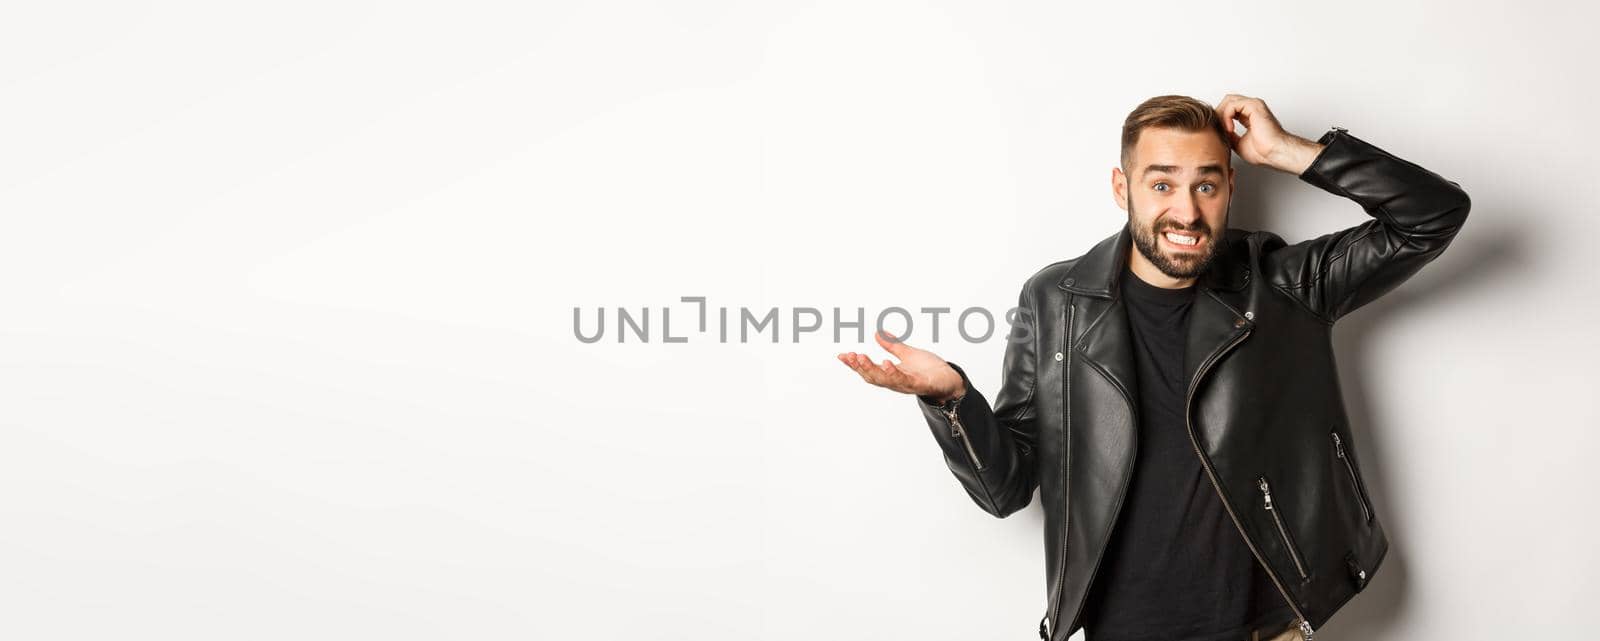 Confused bearded guy in cool leather jacket shrugging, scratch head puzzled and clueless, standing over white background.